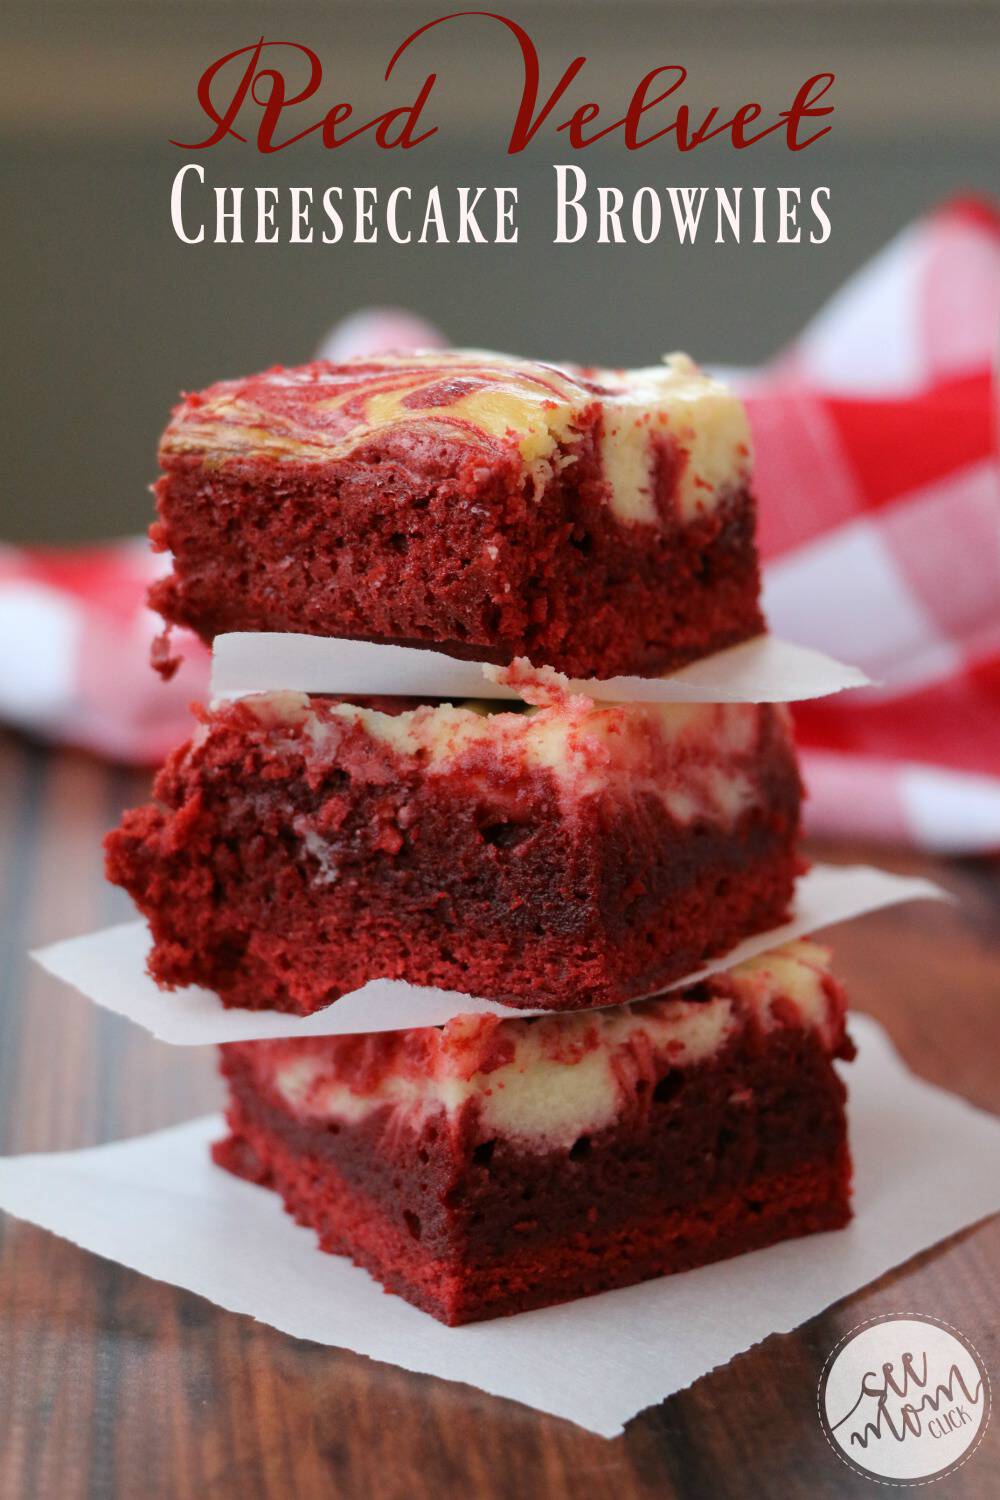 This Red Velvet Cheesecake Brownies recipe is not only seriously delicious but it's also SO pretty. Perfect for serving for a Christmas dessert or Valentine's Day dessert!